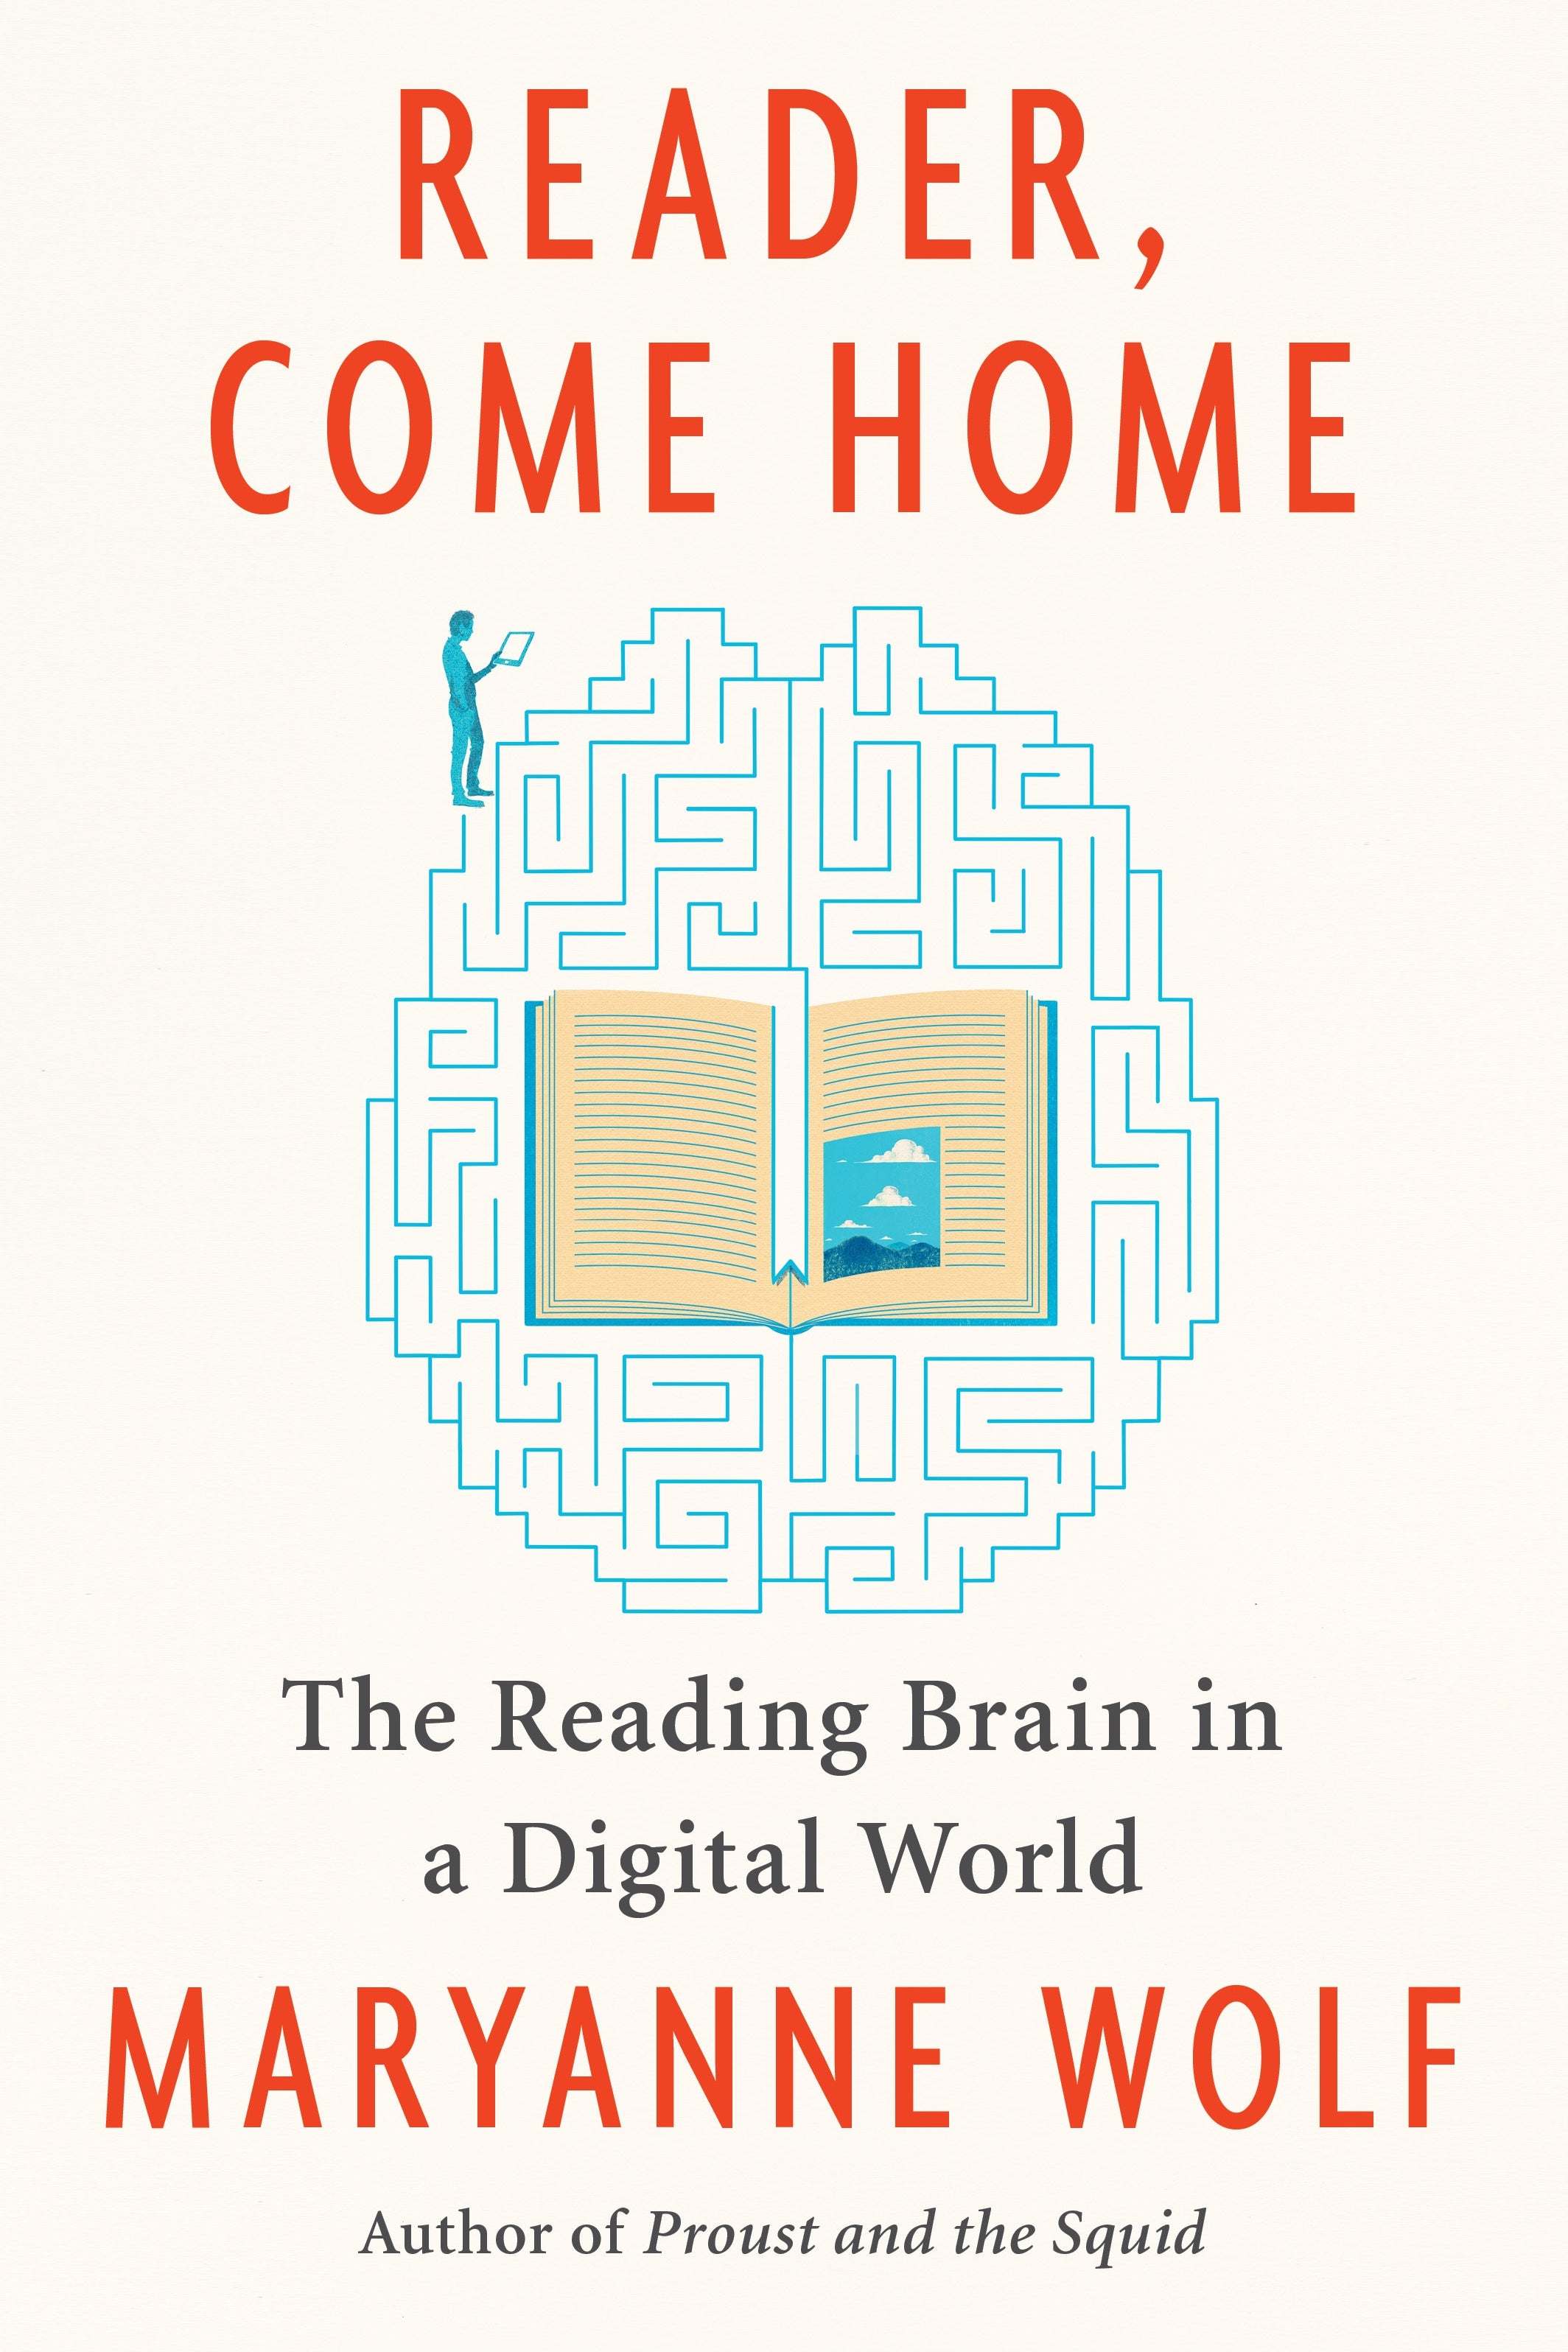 Cover of Reader, Come Home: The Reading Brain in a Digital World.